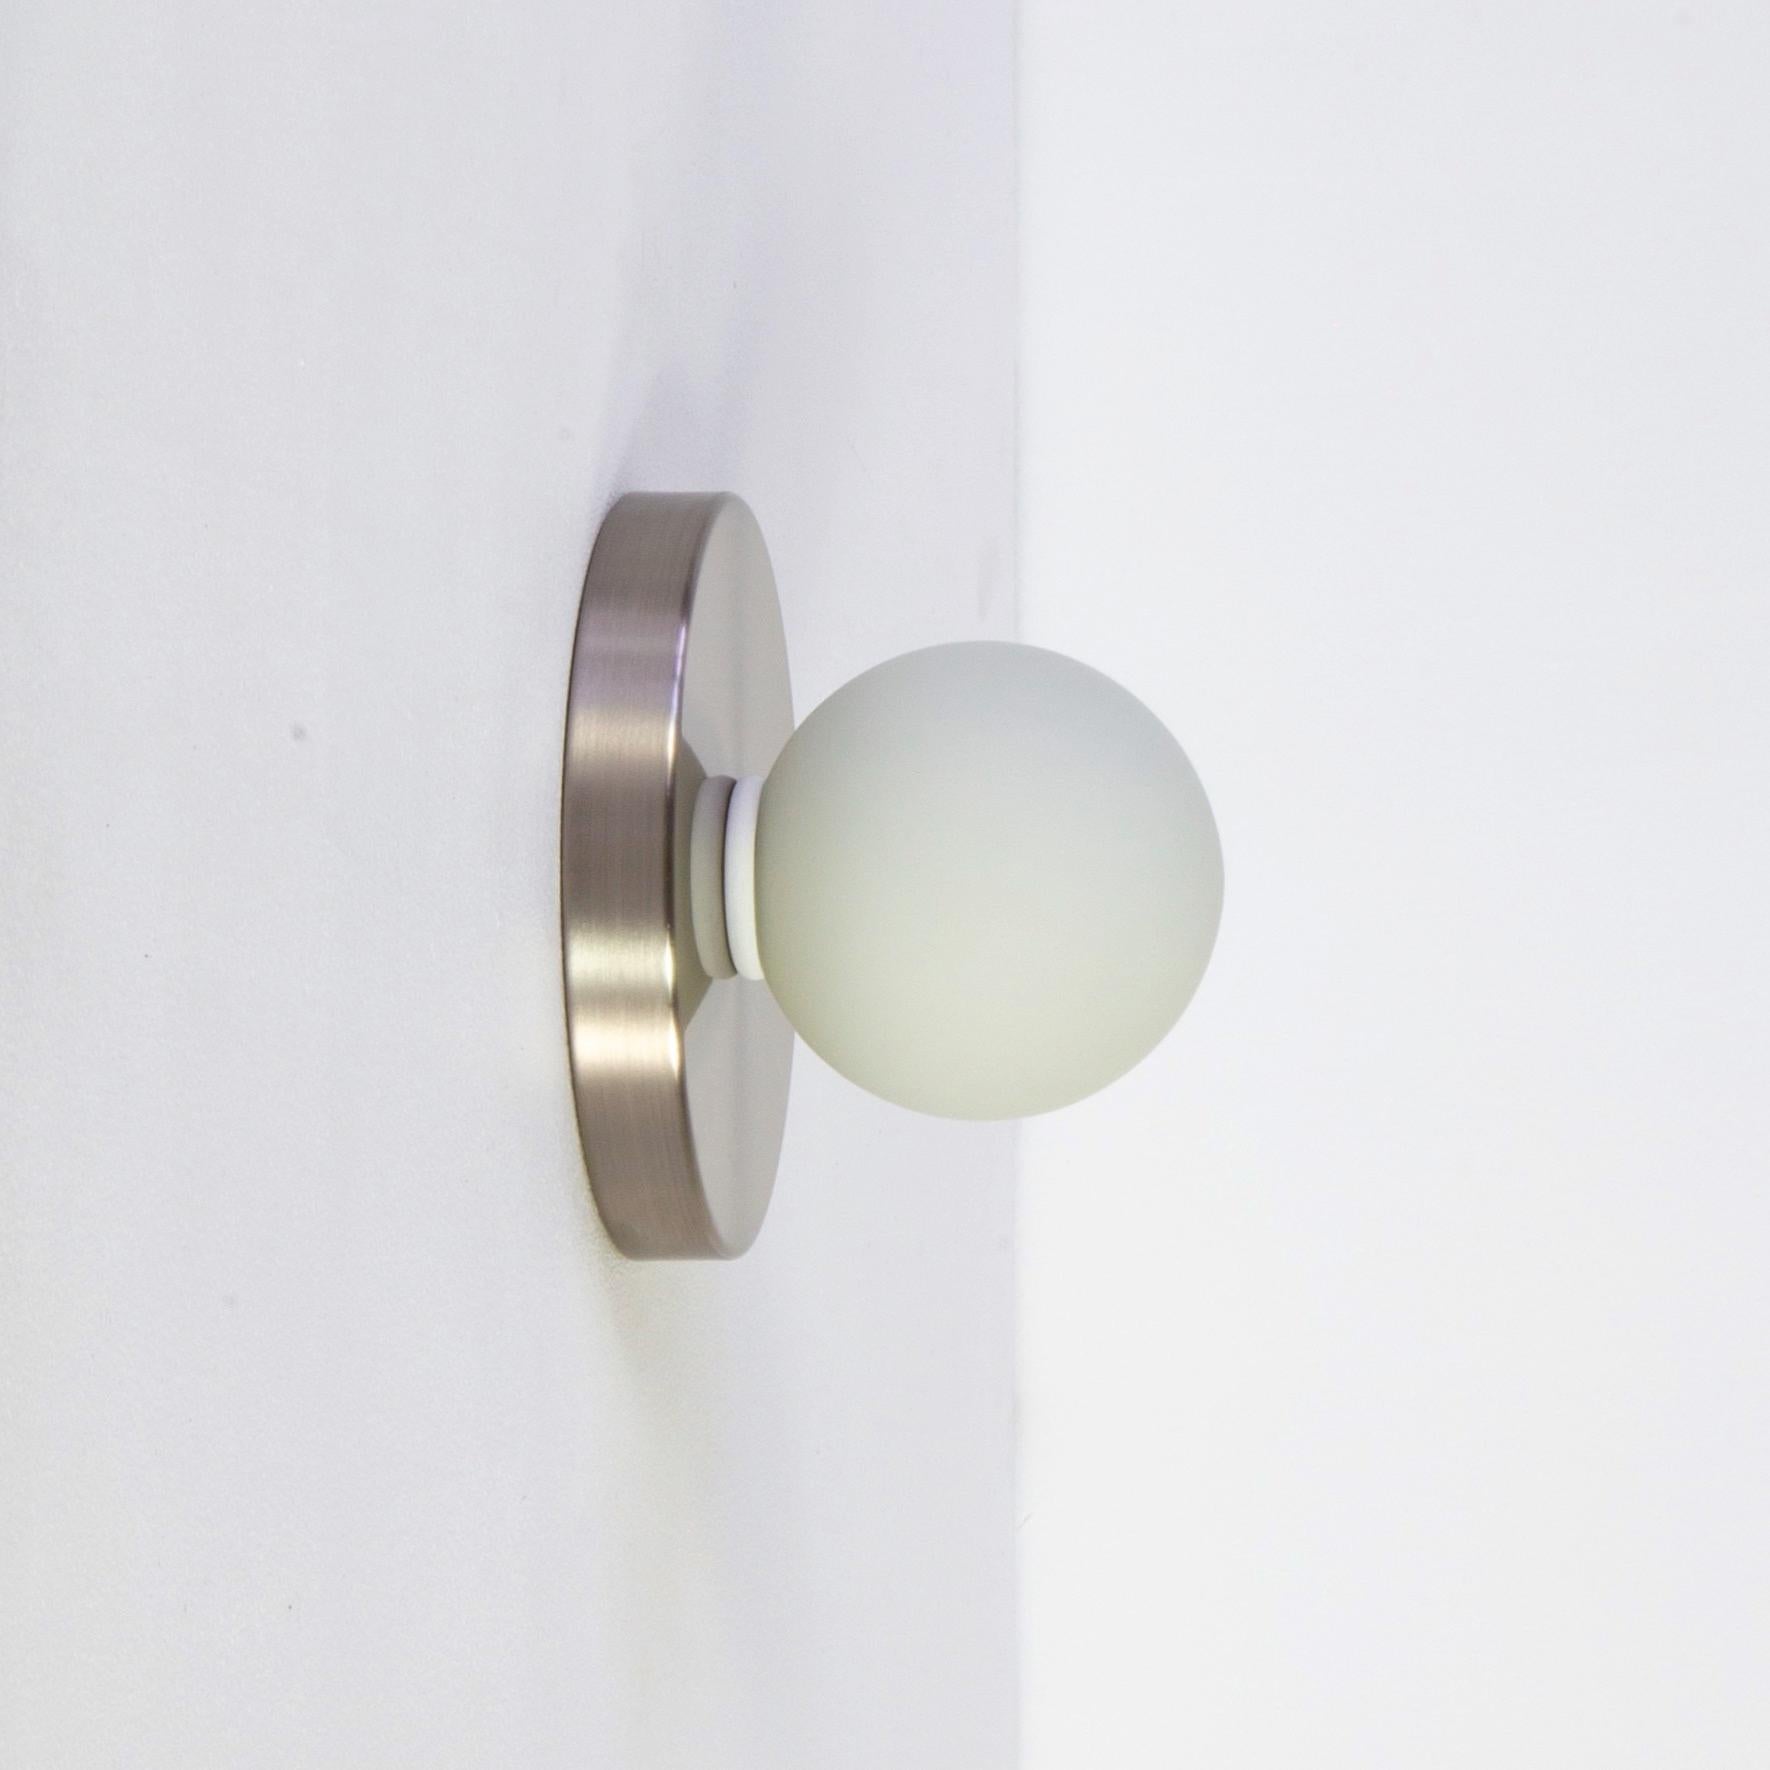 This listing is for 1x Globe Sconce in brushed nickel designed and manufactured by Research.Lighting.

Materials: Brass, Steel & Glass
Finish: Brushed Nickel
Electronics: 1x G9 Socket, 1x 4.5 Watt LED Bulb (included), 450 Lumens
ADA Compliant. UL